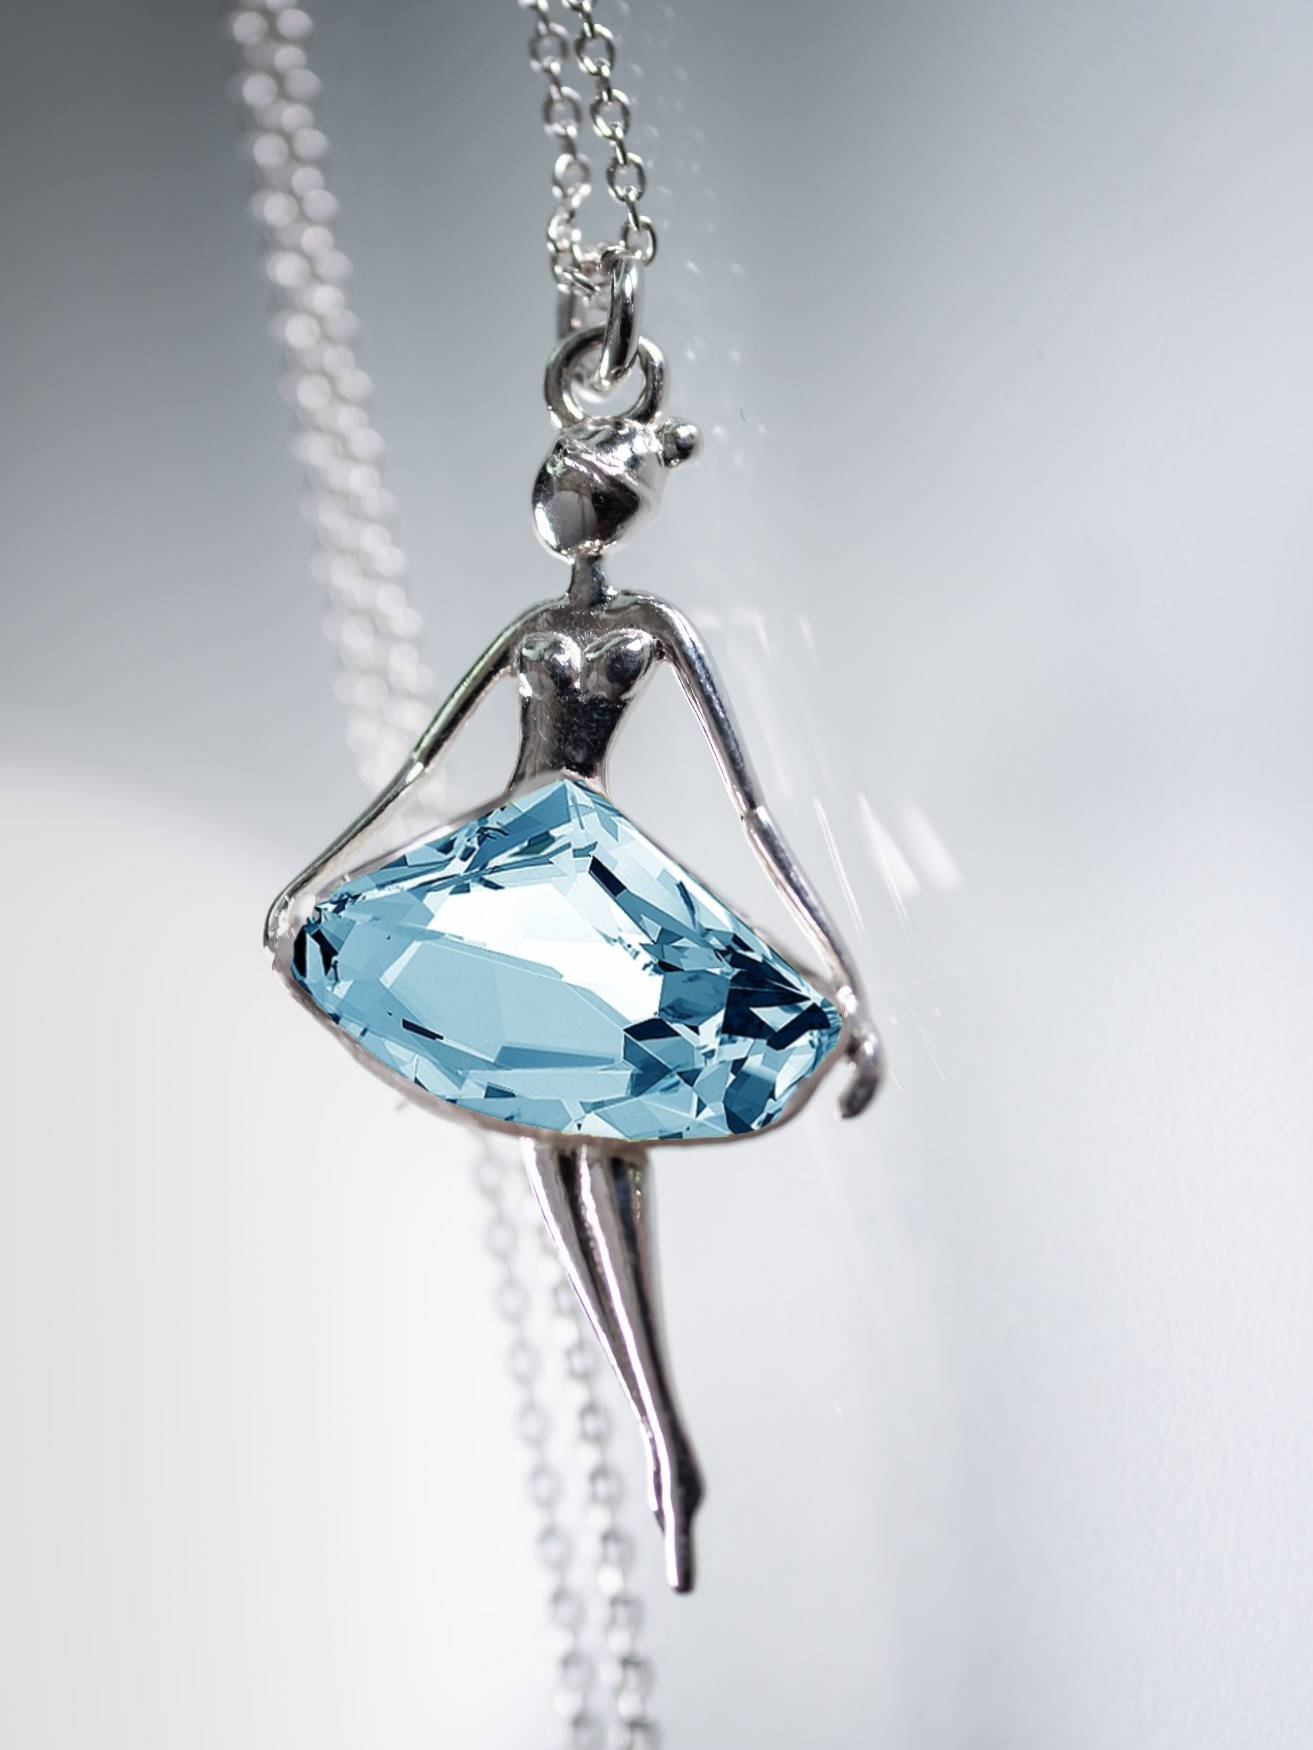 Elegant sterling silver ballerina necklace with a striking aquamarine crystal skirt by Magpie Gems in Ireland.